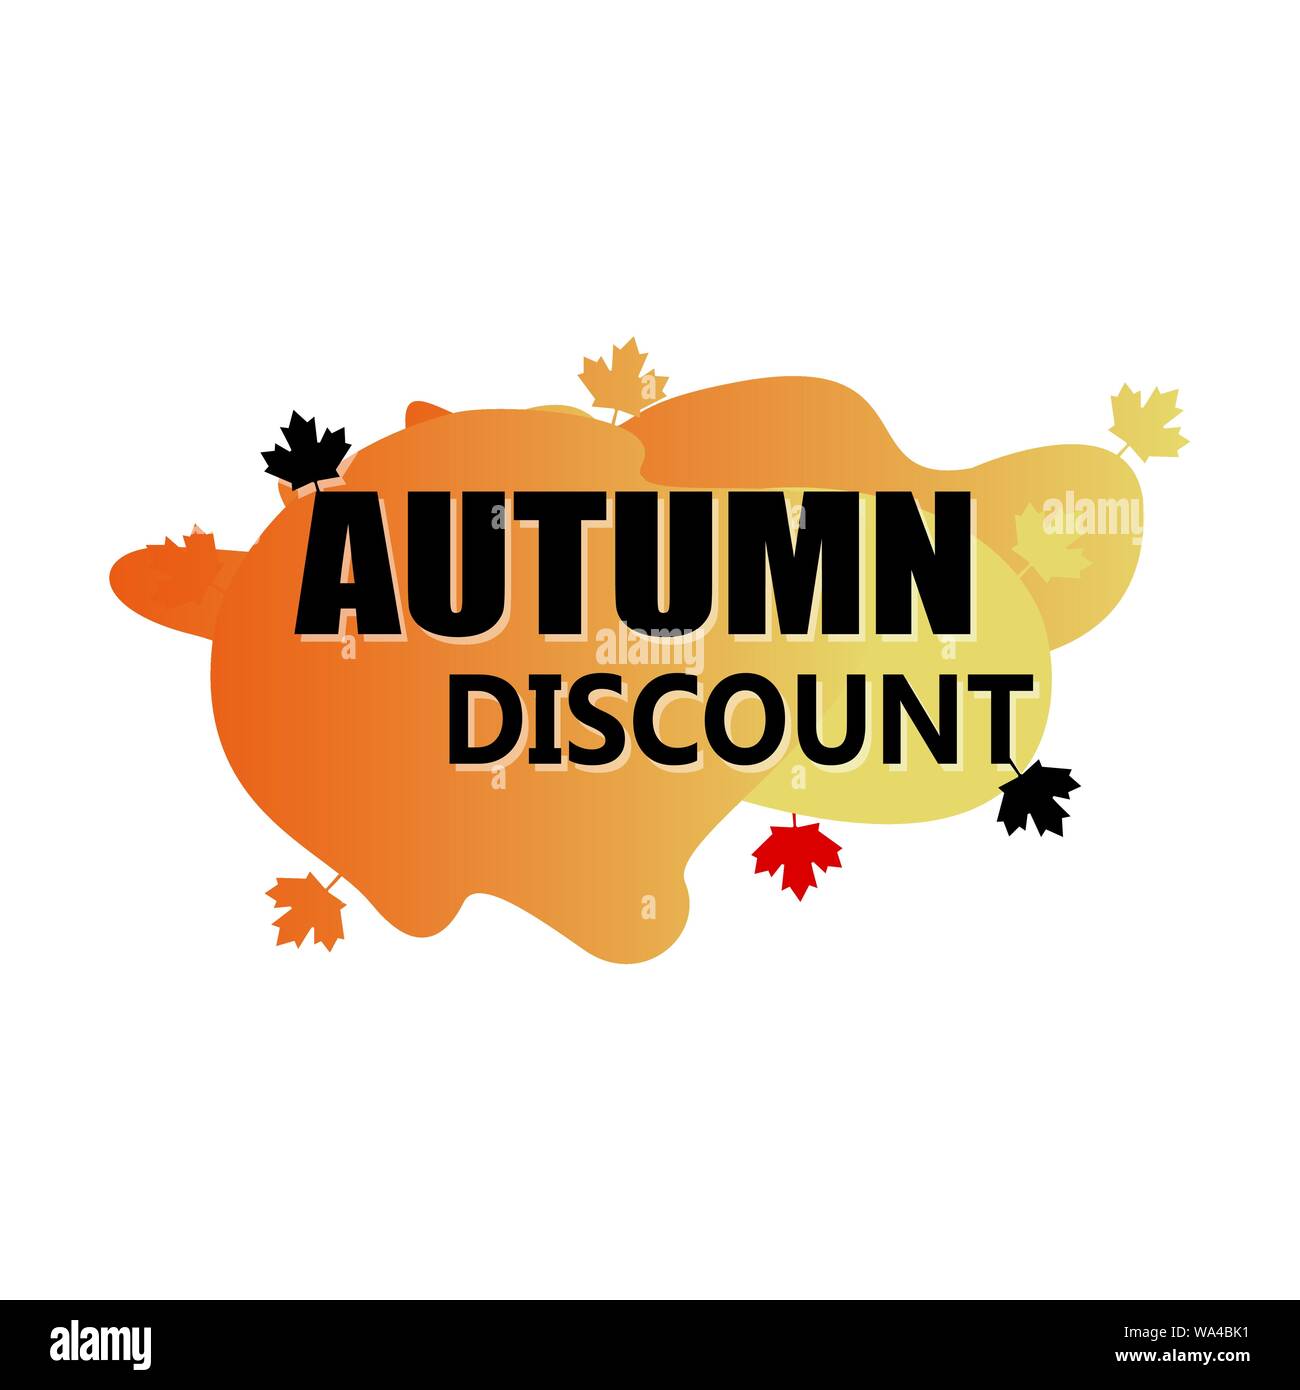 Autumn discount promotional season, advertising shop price fall offer, promotion autumnal sale and discount illustration Stock Vector